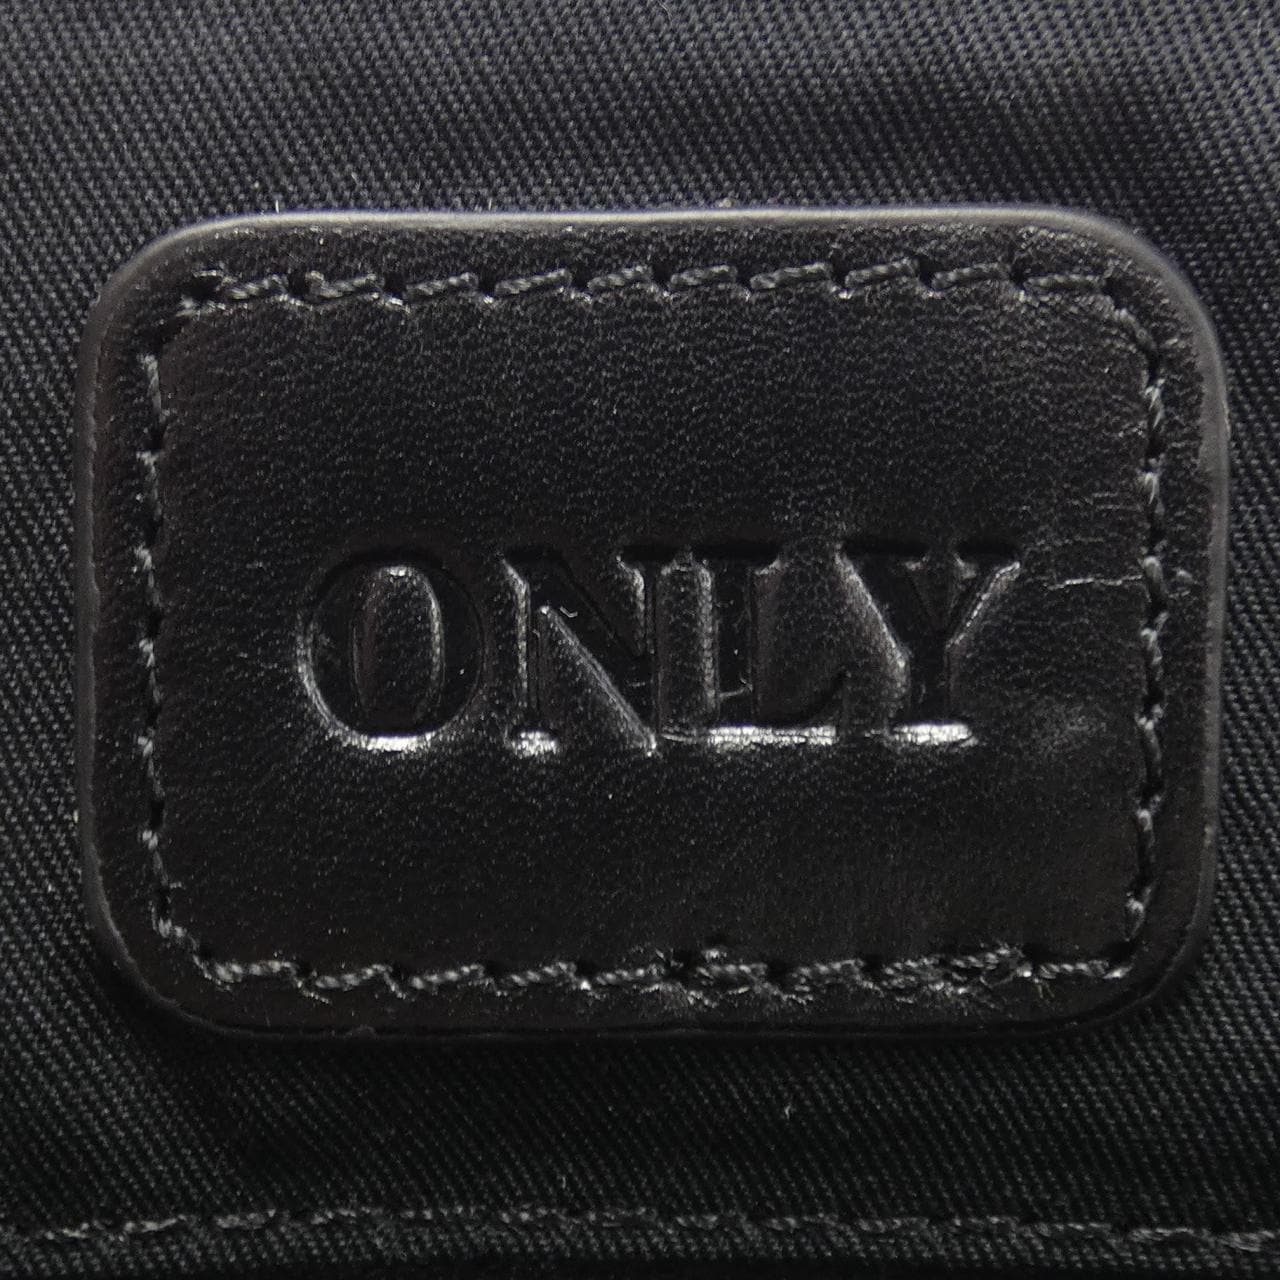 ONLY BAG